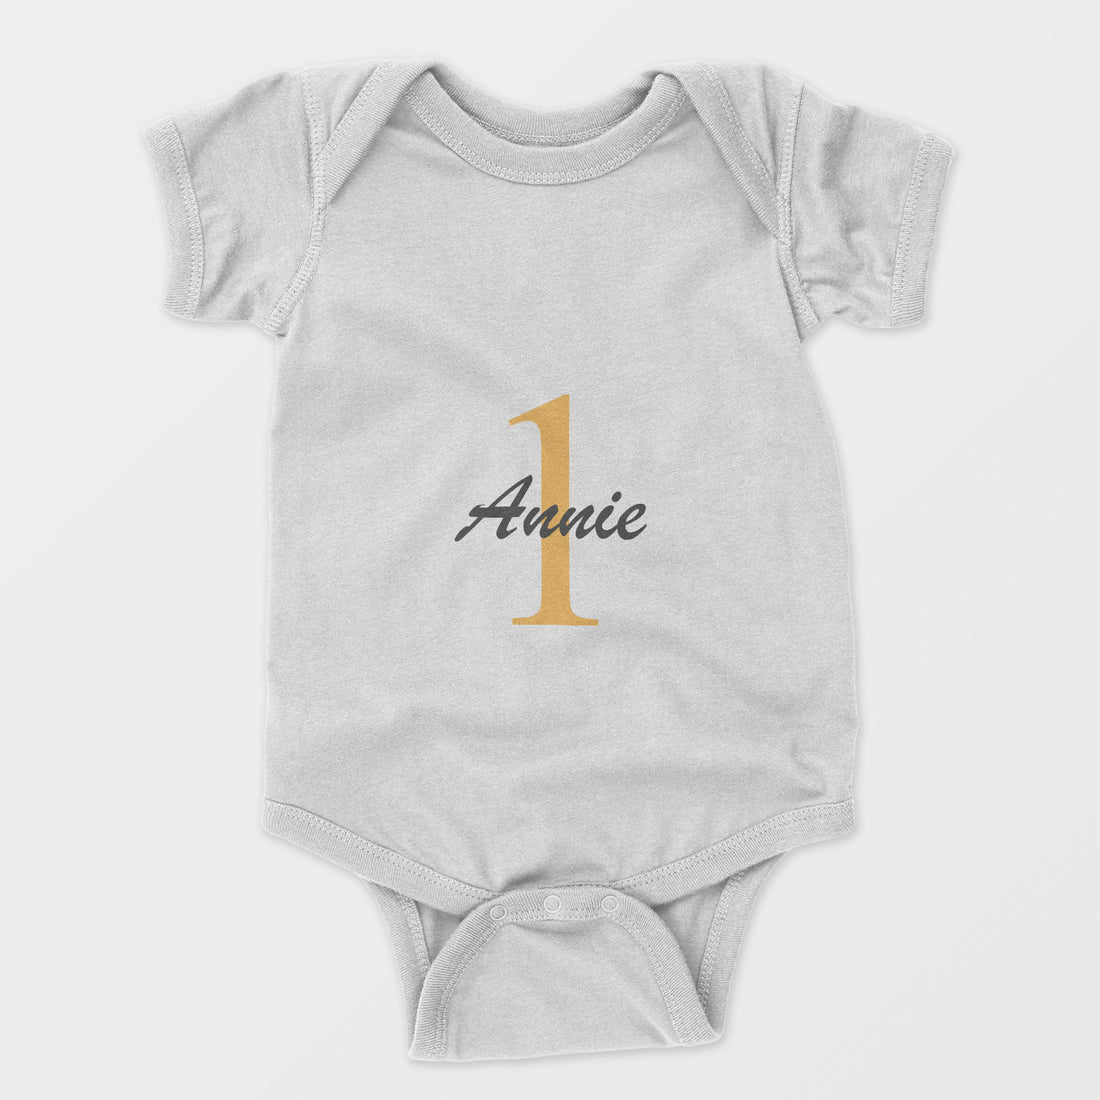 Personalized Baby Bodysuit Onesie For Newborn First Birthday With Name